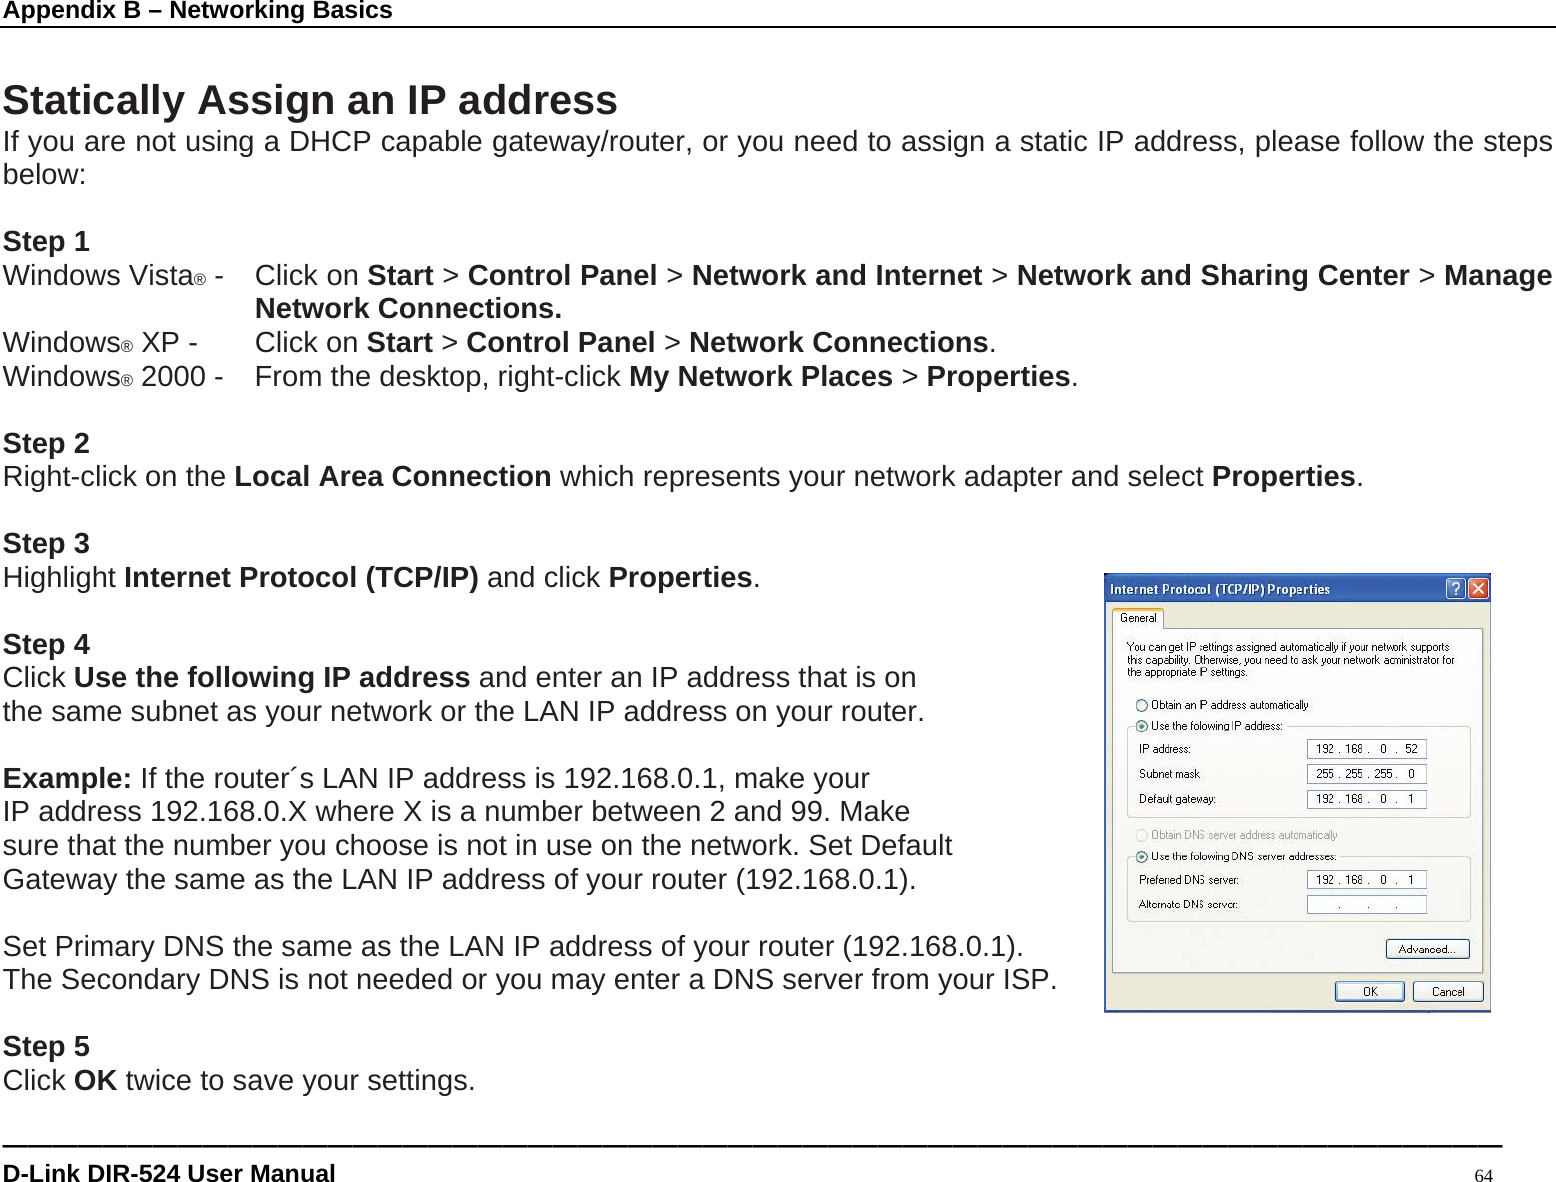 Appendix B – Networking Basics ———————————————————————————————————————————————————————————— D-Link DIR-524 User Manual                                                                                           64  Statically Assign an IP address If you are not using a DHCP capable gateway/router, or you need to assign a static IP address, please follow the steps below:  Step 1 Windows Vista® -  Click on Start &gt; Control Panel &gt; Network and Internet &gt; Network and Sharing Center &gt; Manage Network Connections. Windows® XP -  Click on Start &gt; Control Panel &gt; Network Connections. Windows® 2000 -  From the desktop, right-click My Network Places &gt; Properties.  Step 2 Right-click on the Local Area Connection which represents your network adapter and select Properties.  Step 3 Highlight Internet Protocol (TCP/IP) and click Properties.  Step 4 Click Use the following IP address and enter an IP address that is on   the same subnet as your network or the LAN IP address on your router.    Example: If the router´s LAN IP address is 192.168.0.1, make your   IP address 192.168.0.X where X is a number between 2 and 99. Make sure that the number you choose is not in use on the network. Set Default Gateway the same as the LAN IP address of your router (192.168.0.1).    Set Primary DNS the same as the LAN IP address of your router (192.168.0.1).   The Secondary DNS is not needed or you may enter a DNS server from your ISP.  Step 5 Click OK twice to save your settings.